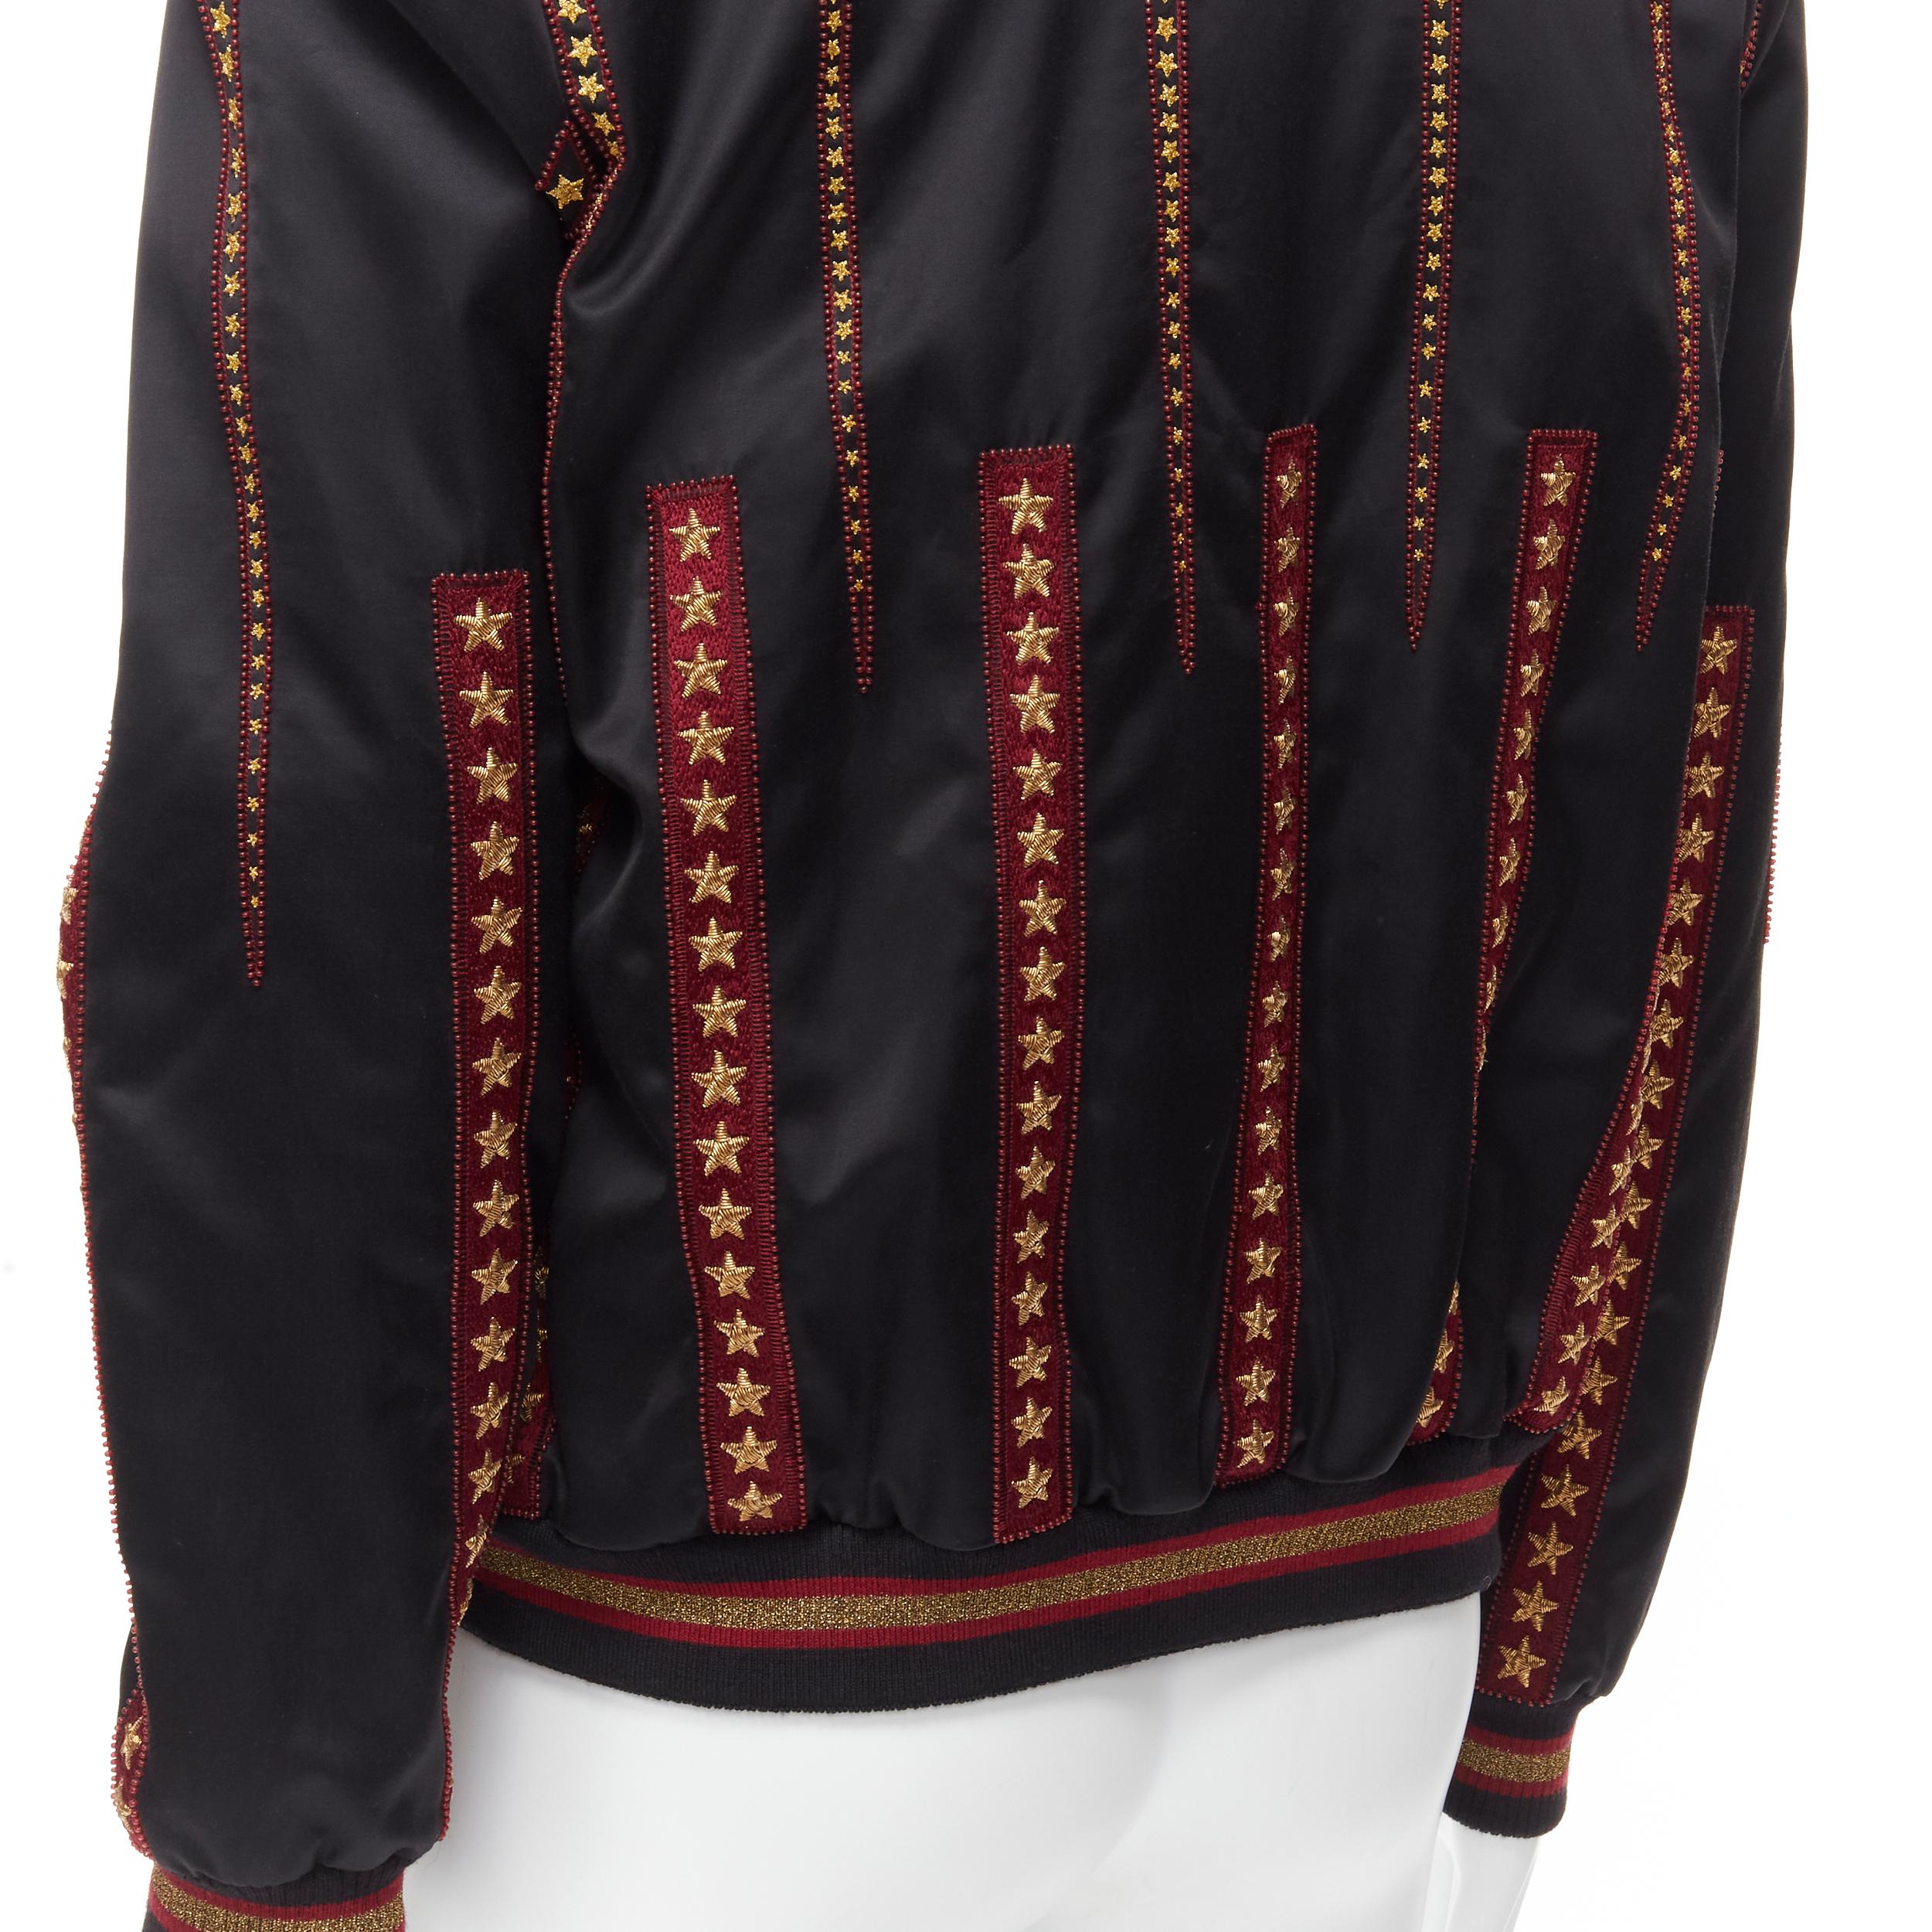 new SAINT LAURENT 2018 Teddy black gold star red bead embellished bomber EU50 L 
Reference: TGAS/B01703 
Brand: Saint Laurent 
Designer: Anthony Vaccarello 
Collection: 2018 Runway 
Material: Satin 
Color: Black 
Pattern: Solid 
Closure: Button